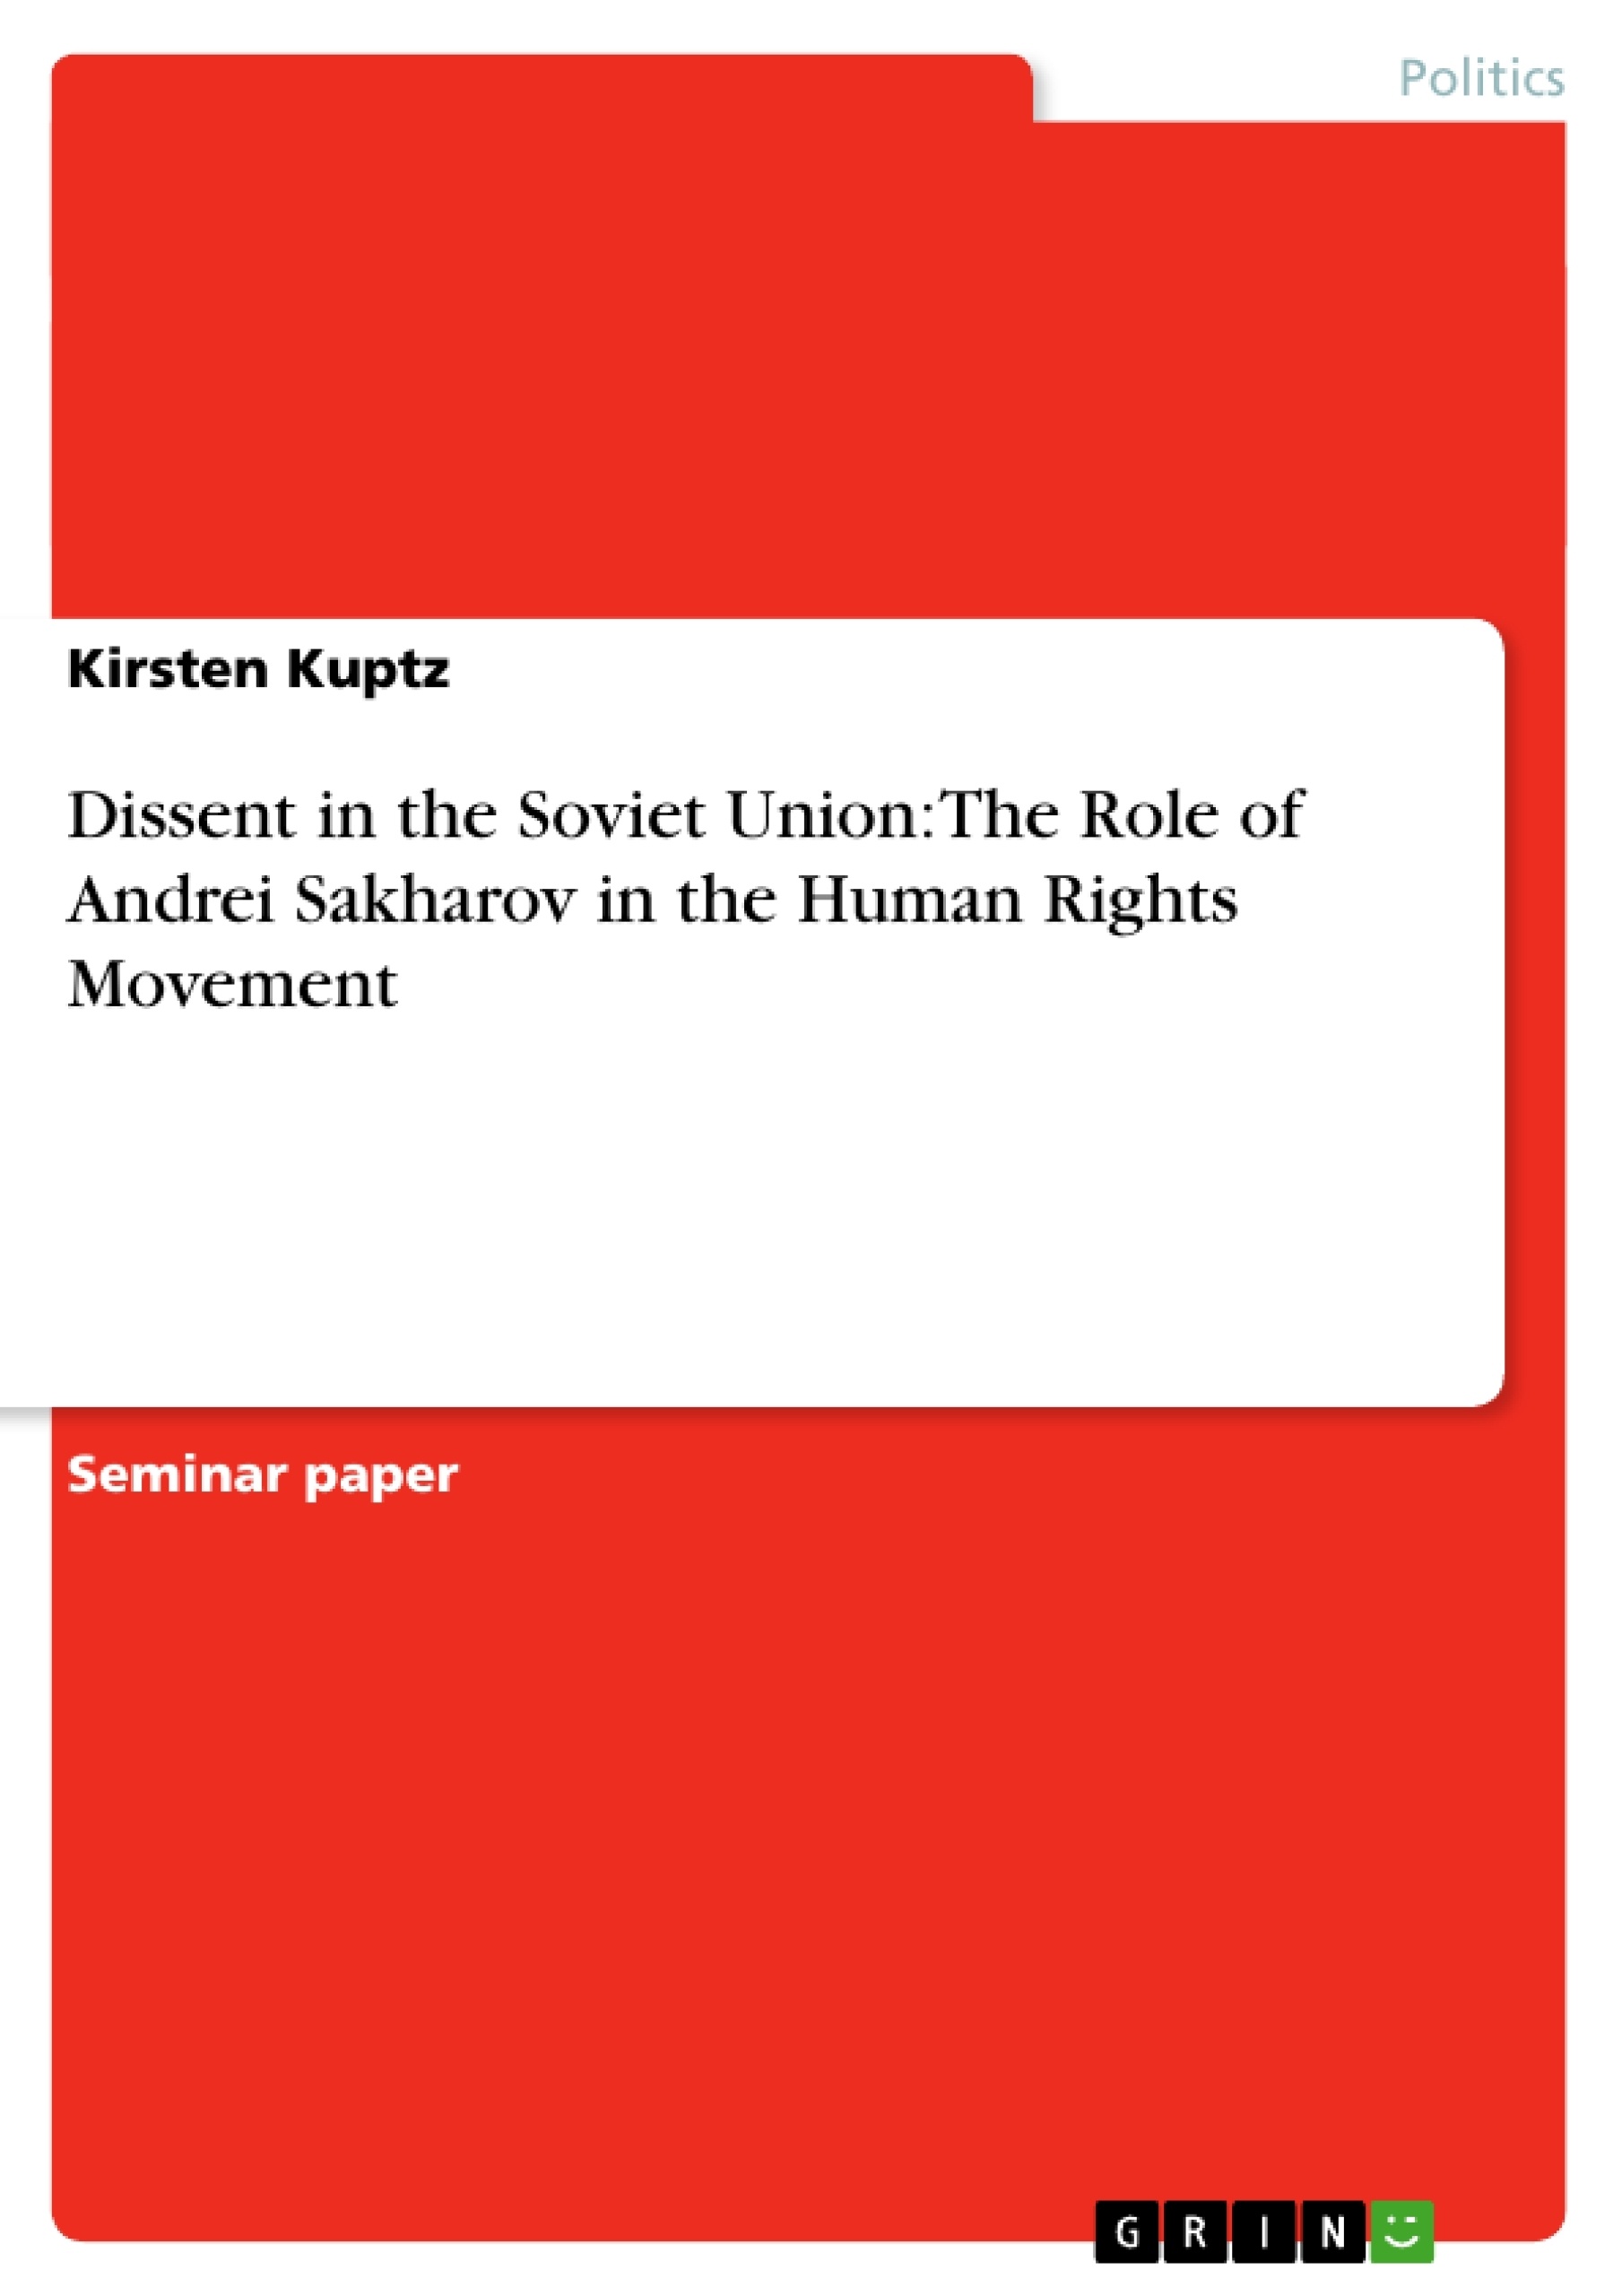 Title: Dissent in the Soviet Union: The Role of Andrei Sakharov in the Human Rights Movement